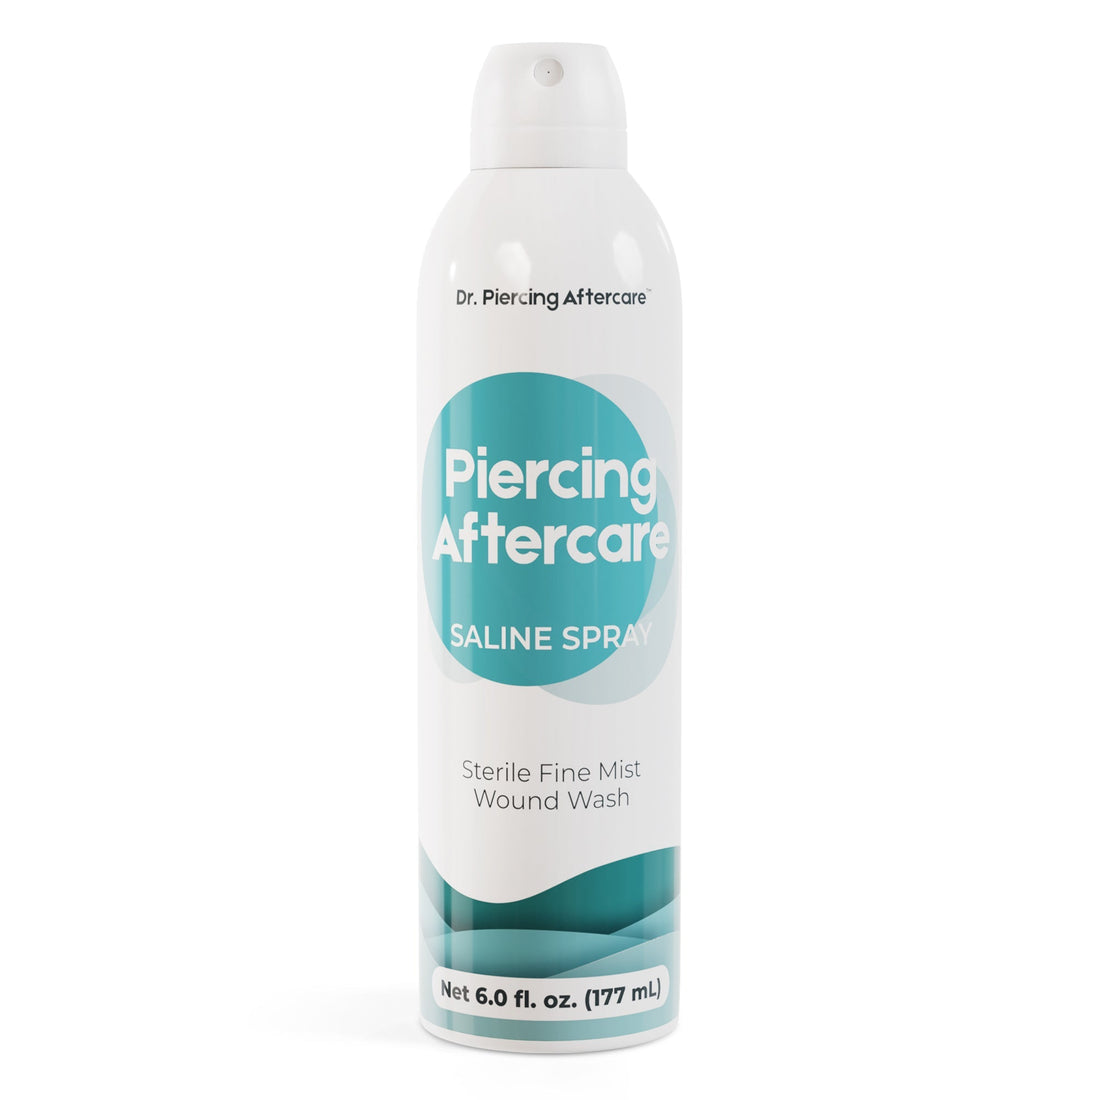 Dr. Piercing Aftercare Saline Spray (1 Case) - Dr. Piercing Aftercare